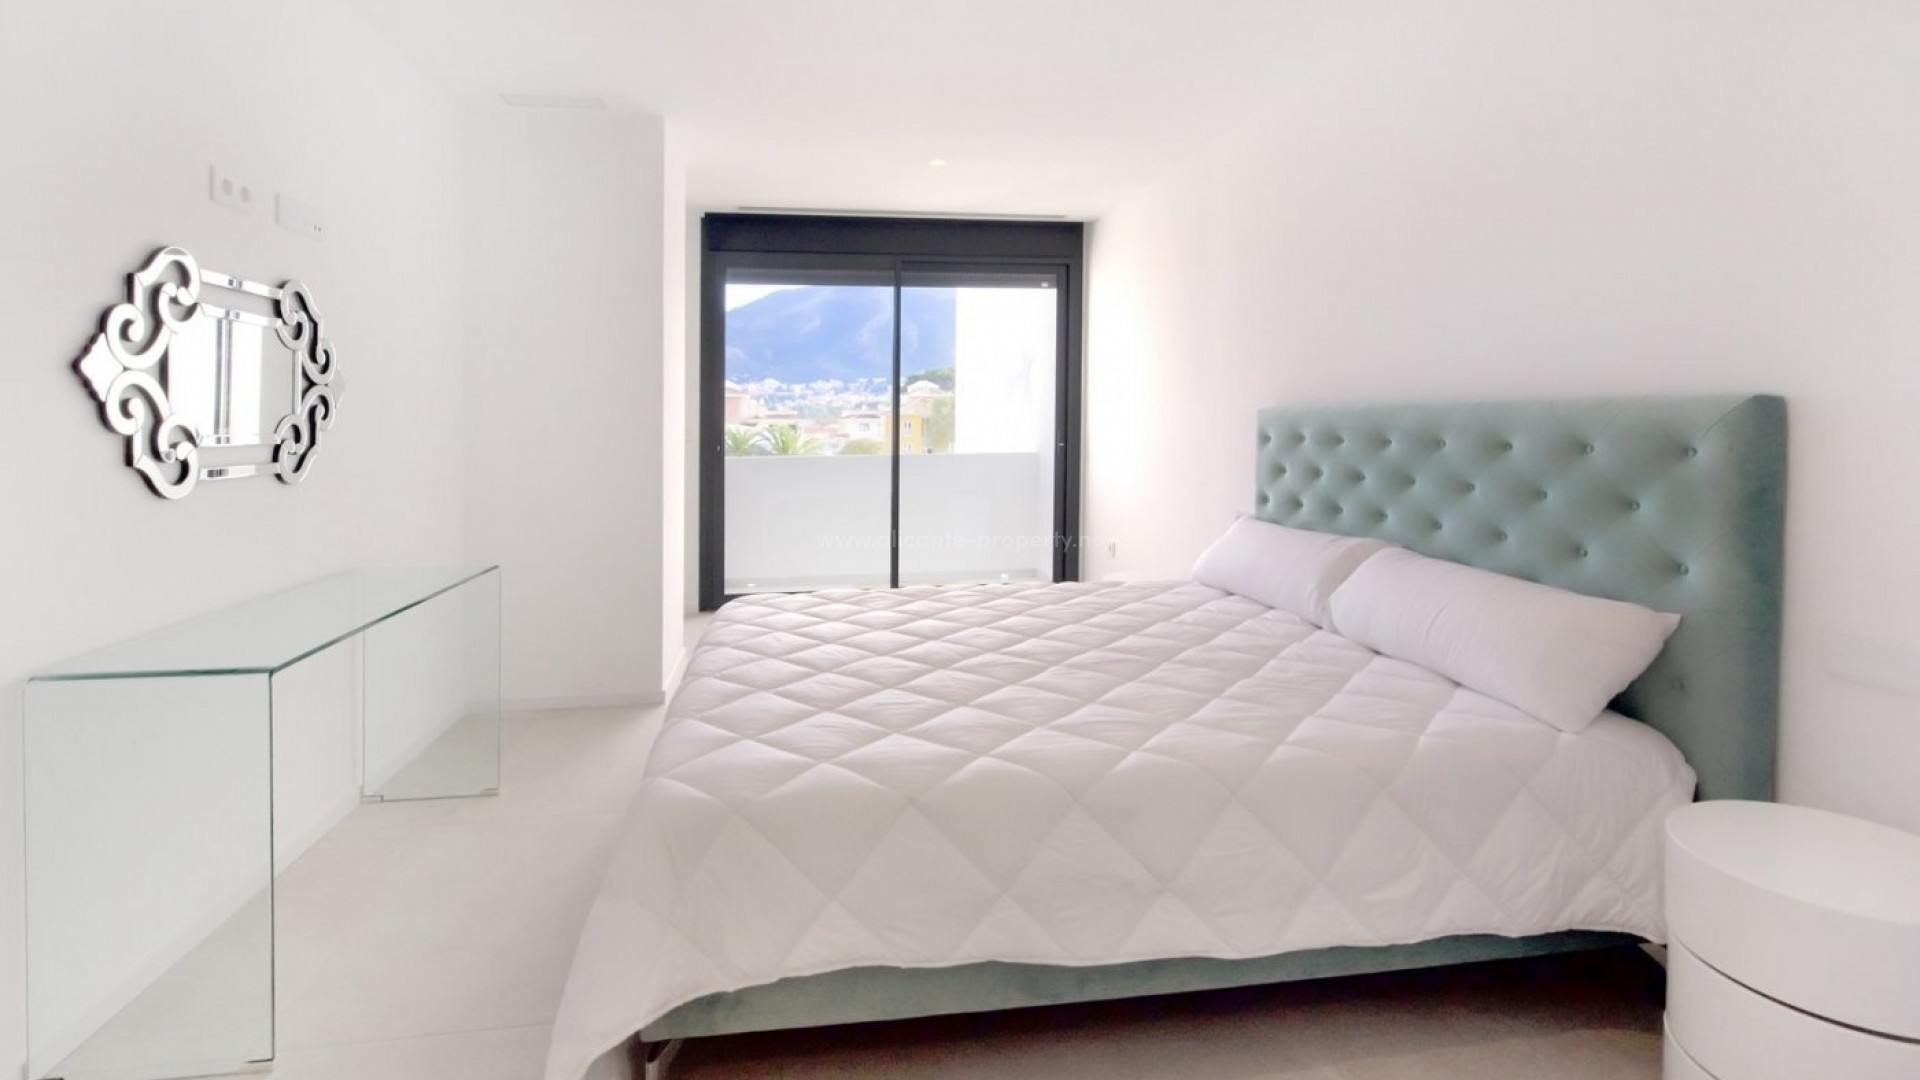 Semi-detached house in El Albir with private swimming pool, 2/3/4/5 bedrooms with attached bathrooms, spacious terraces and solarium with fantastic views of the sea